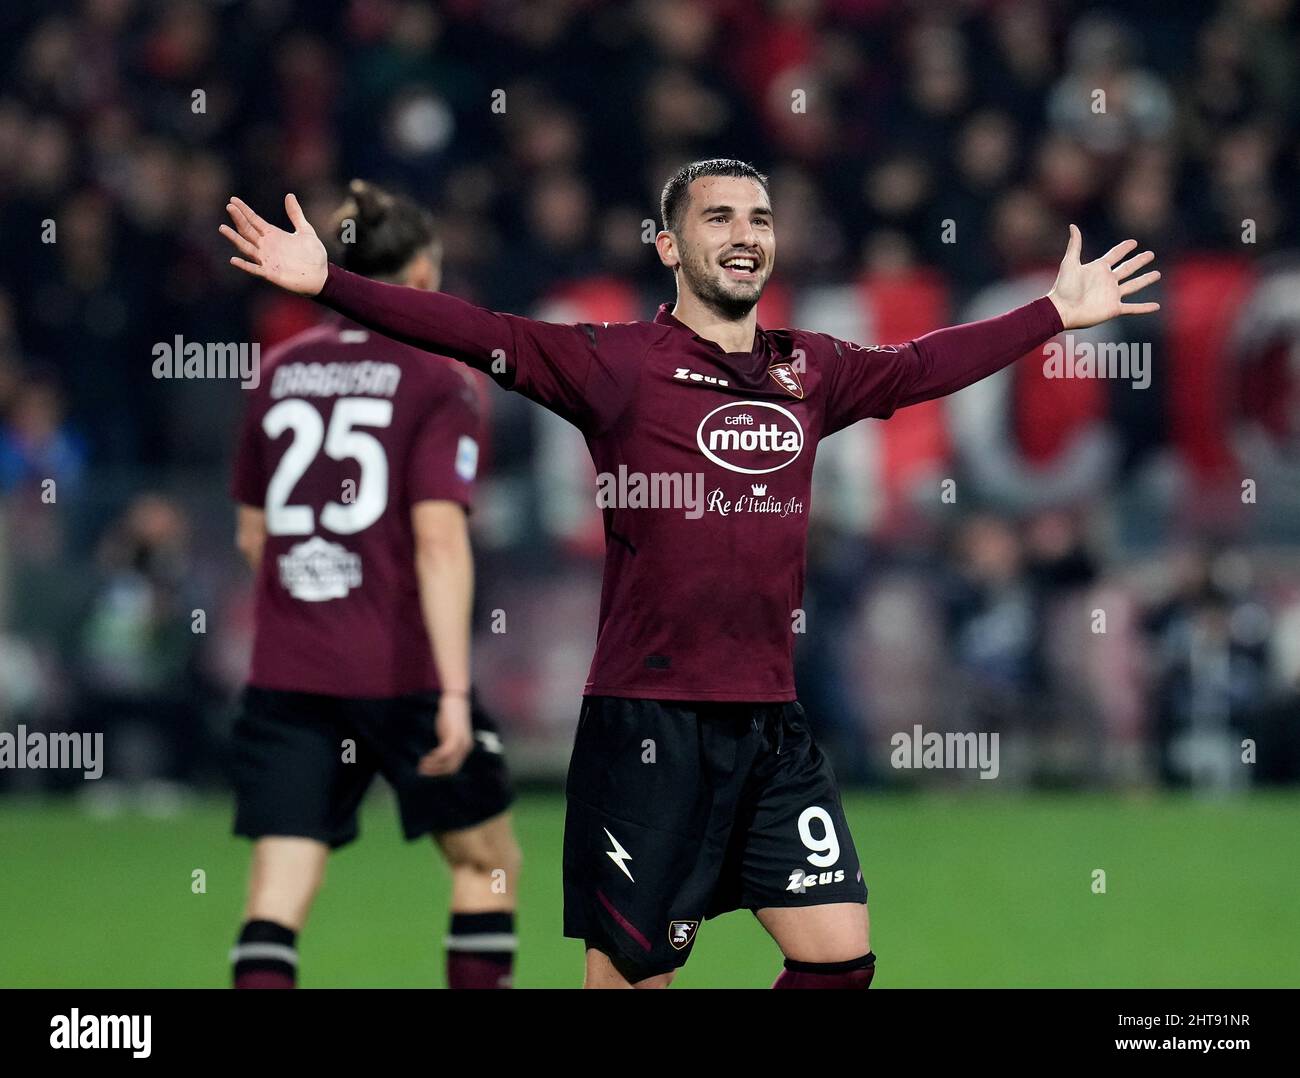 SALERNO, ITALY - FEBRUARY 19: Federico Bonazzoli of US Salernitana celebrates with his team after scores his goal ,during the Serie A match between US Salernitana and AC Milan at Stadio Arechi on February 19, 2022 in Salerno, Italy. (Photo by MB Media) Stock Photo